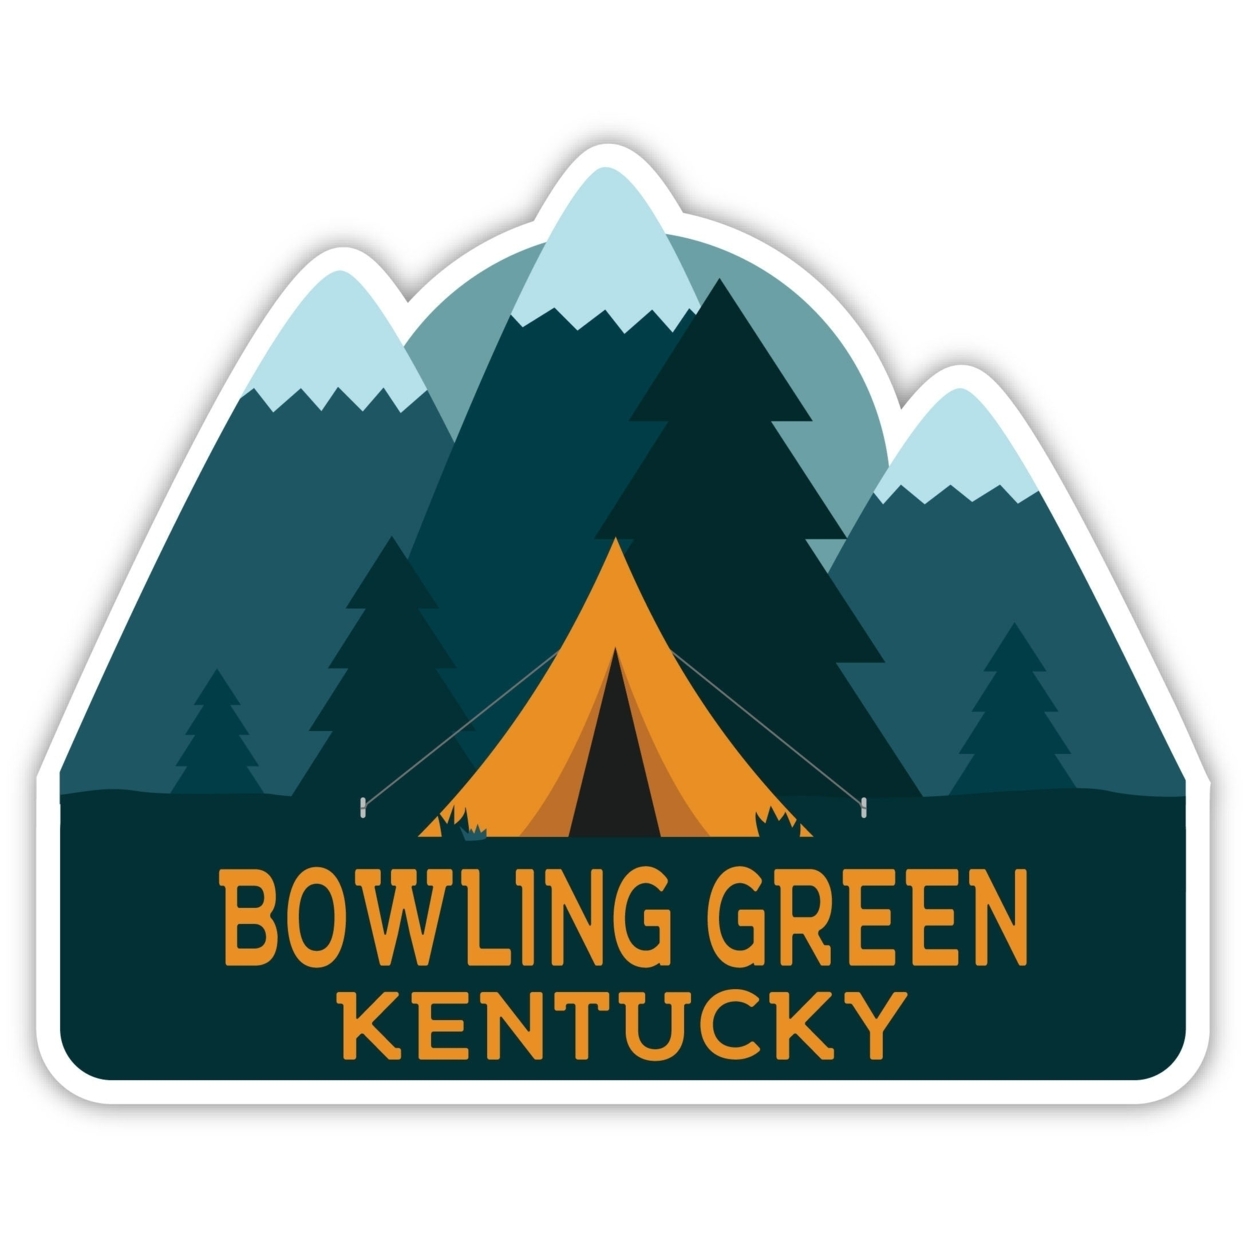 Bowling Green Kentucky Souvenir Decorative Stickers (Choose Theme And Size) - 4-Pack, 8-Inch, Tent